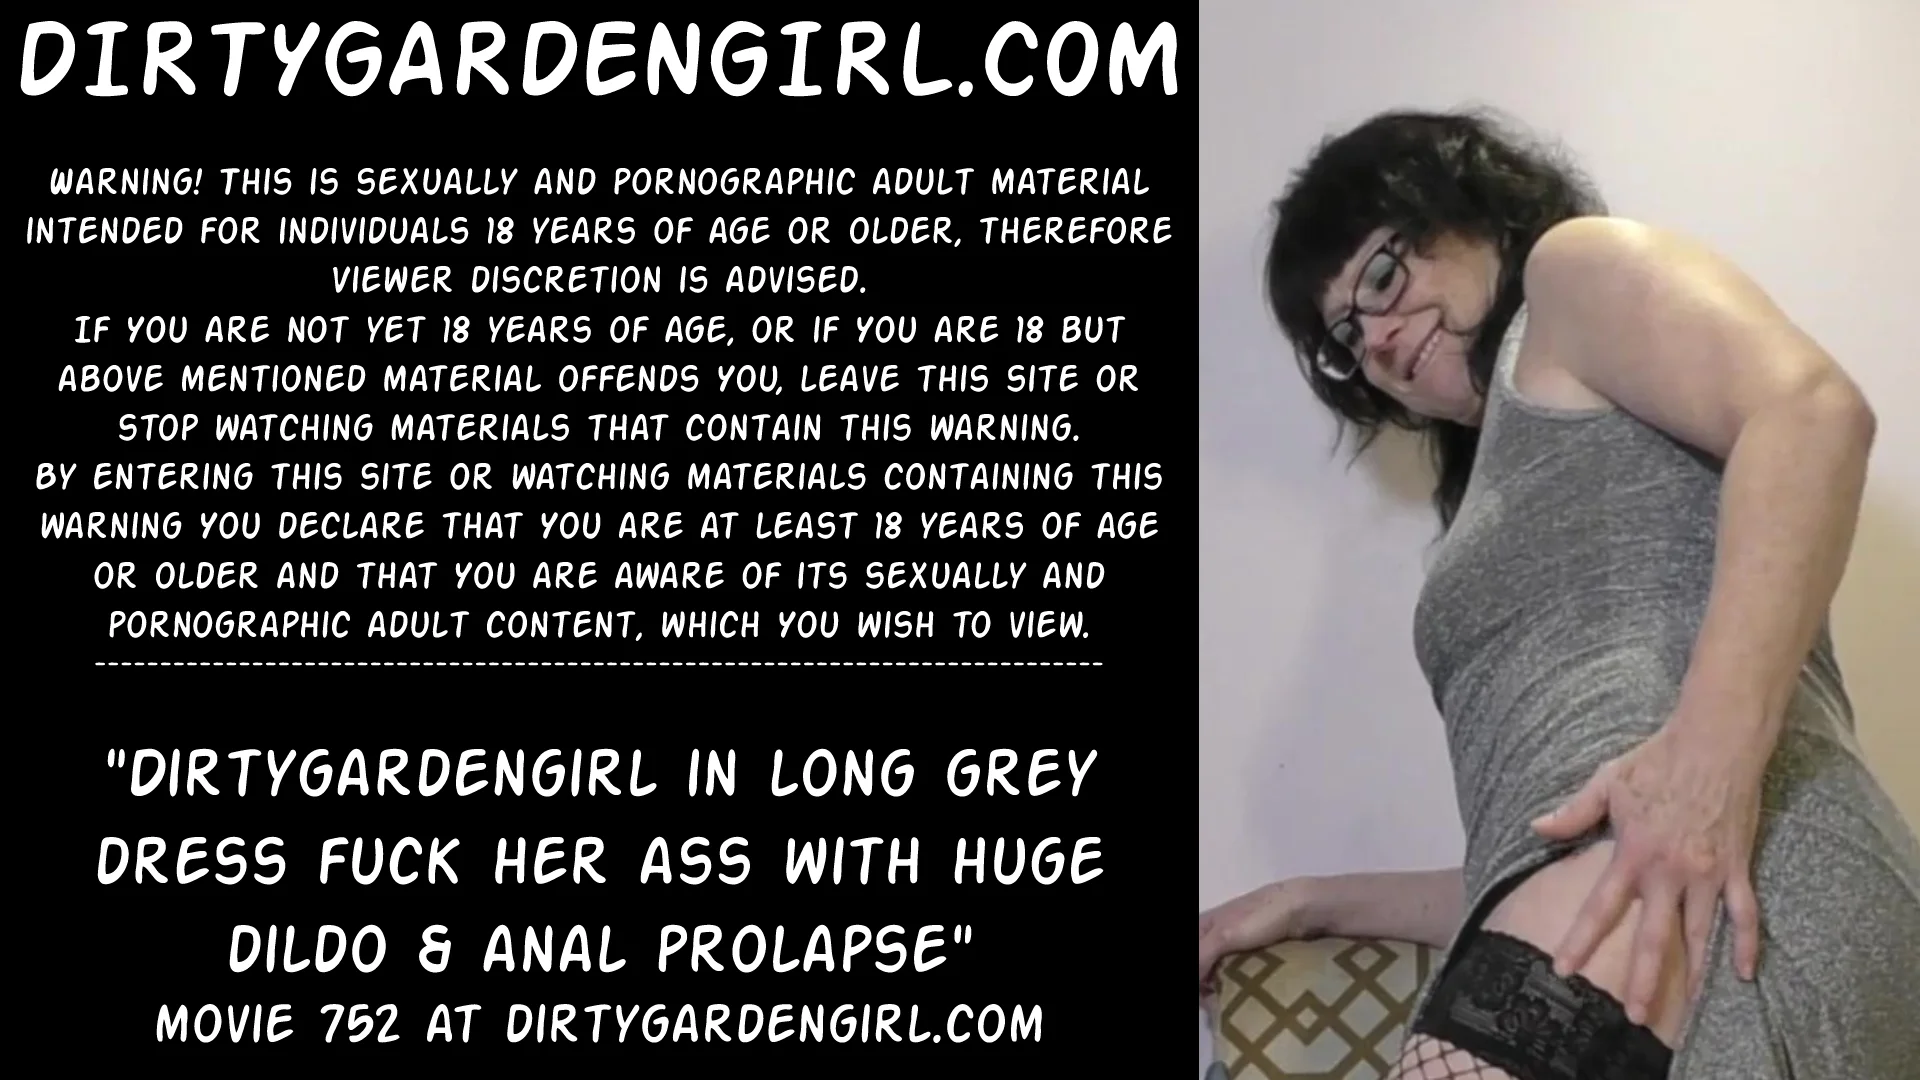 Dirtygardengirl grey dress fuck anal dildo and prolapse picture